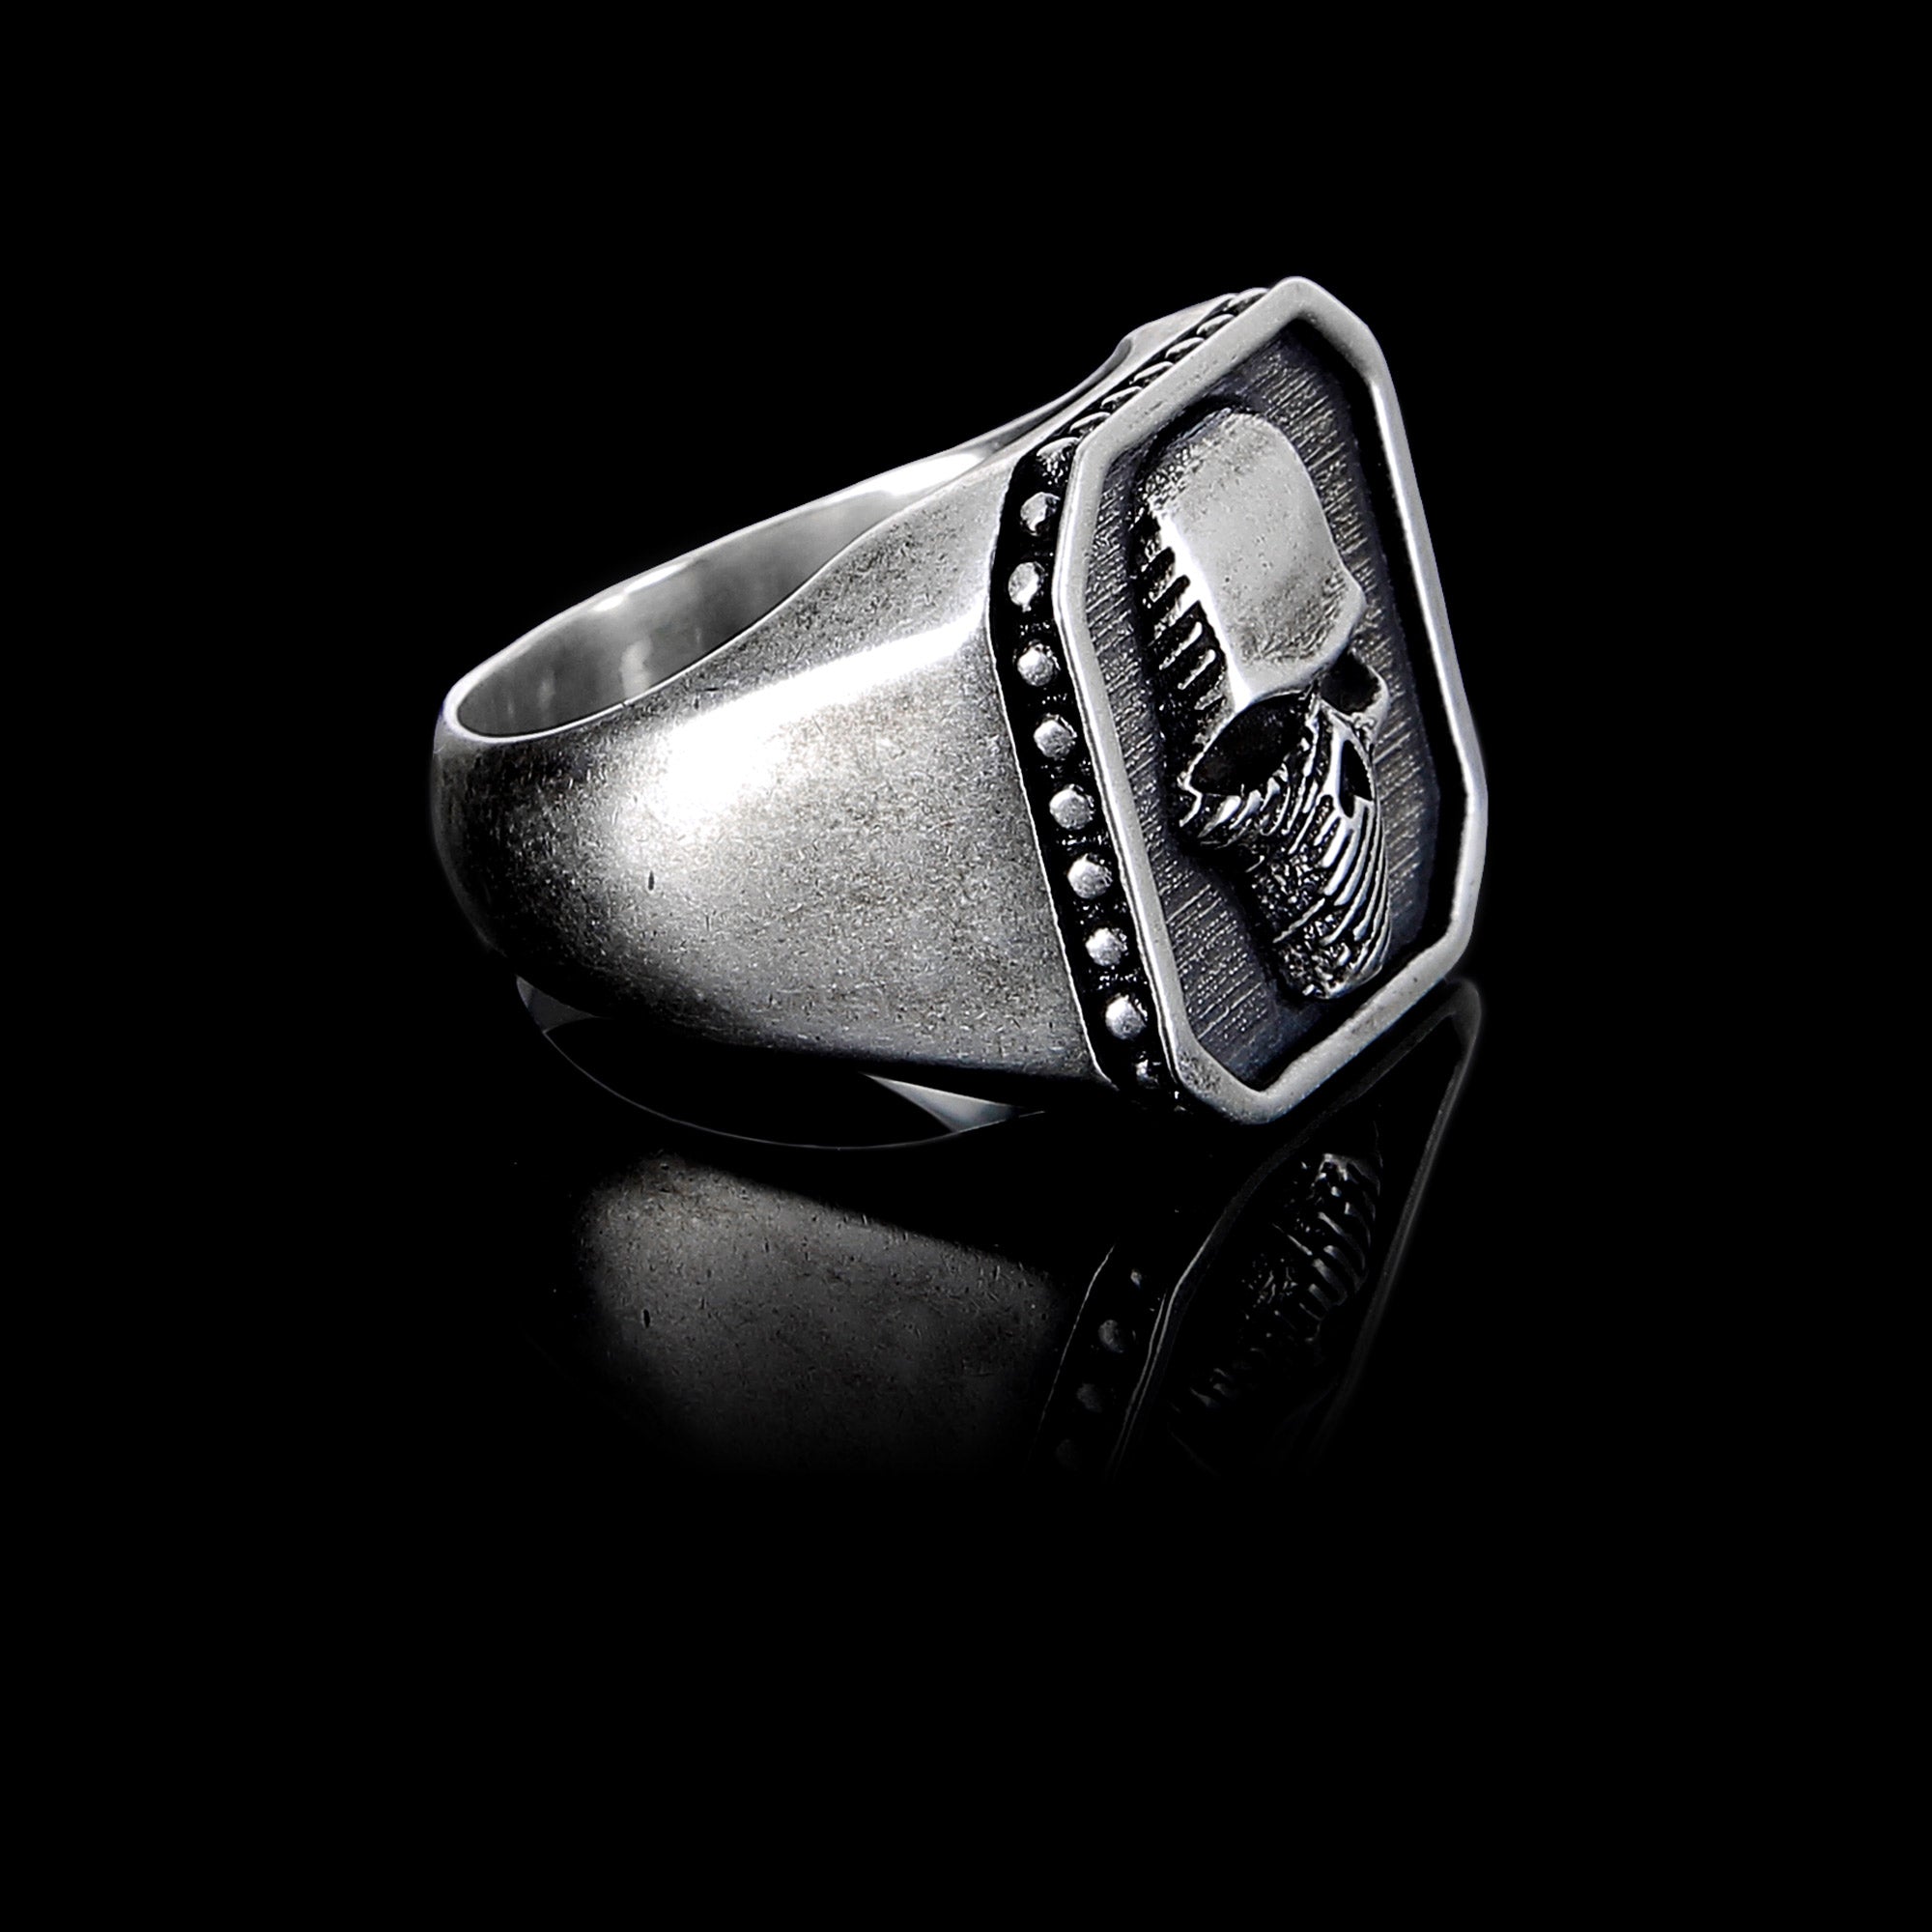 Ghost Signet - Officially licensed Ghost Recon Breakpoint limited edition signet ring